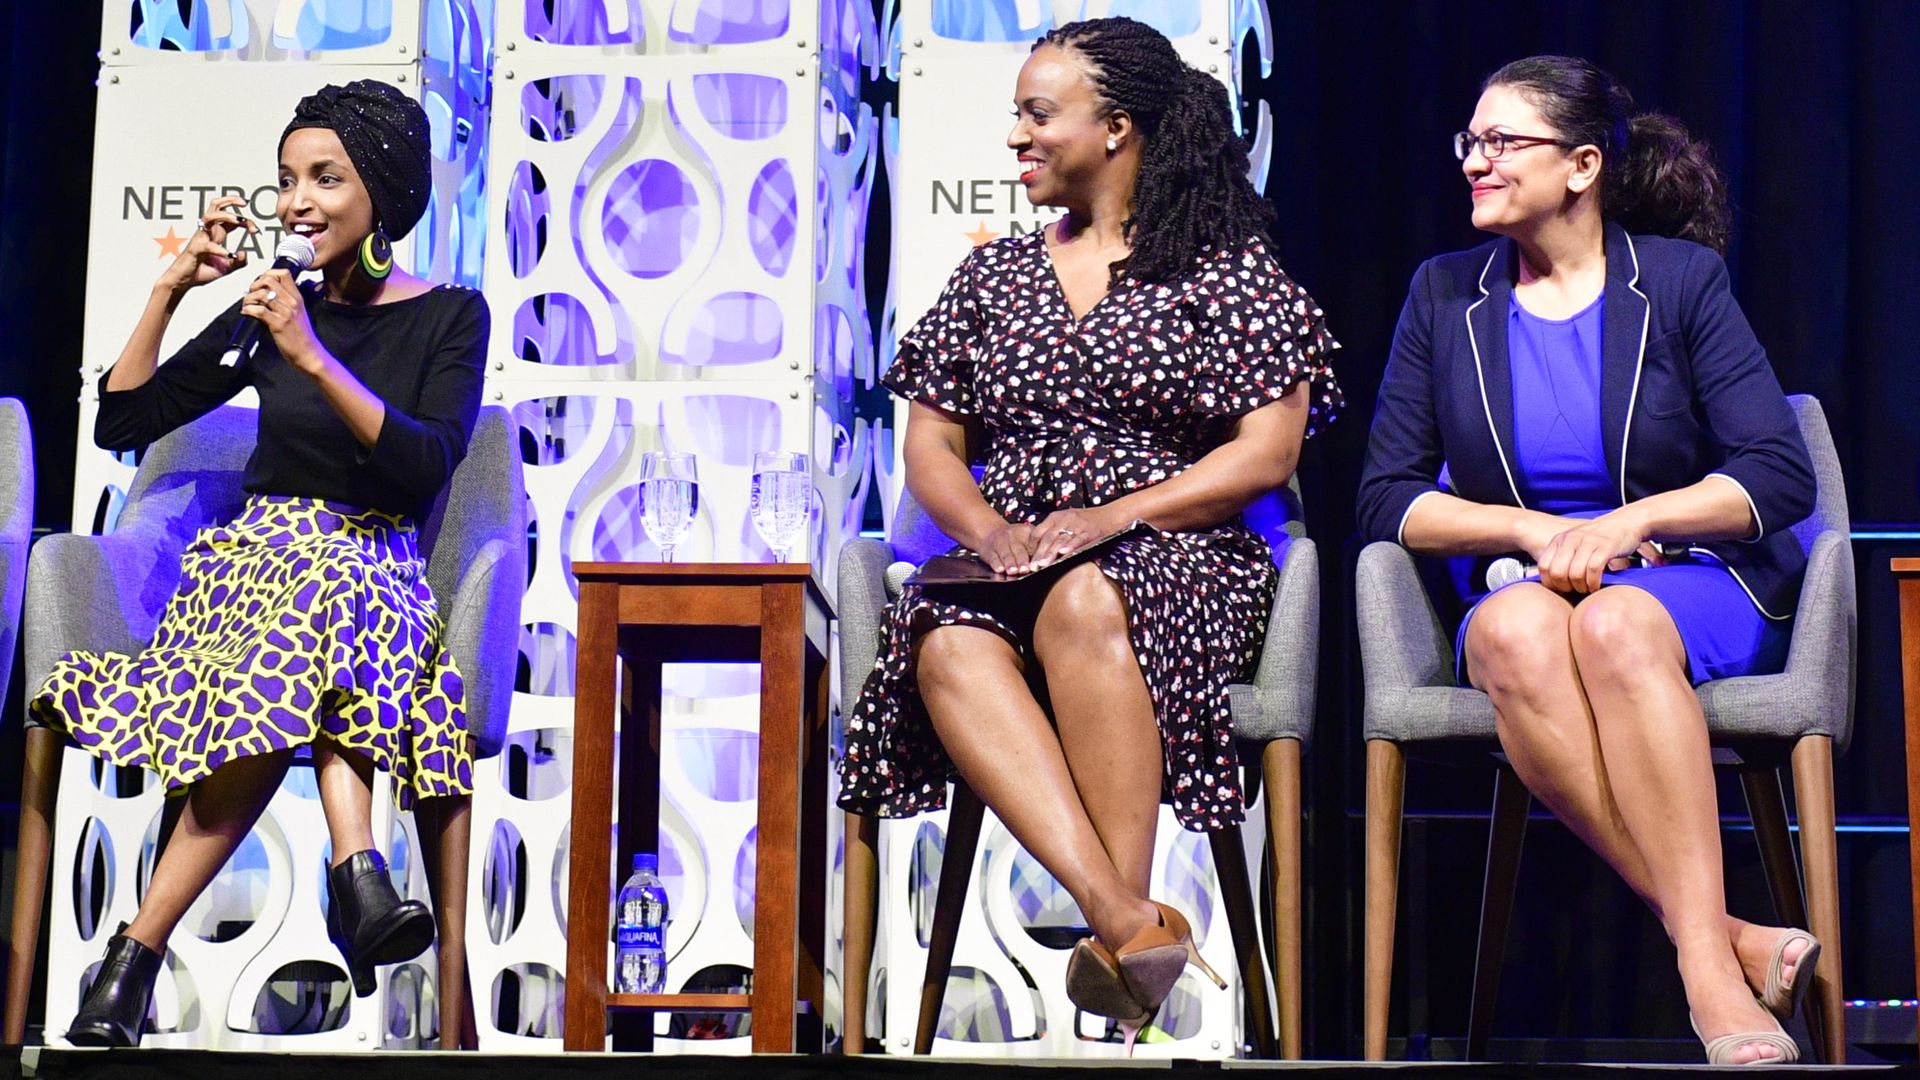 Rep. Ayanna Pressley (D-MA), Rep. Rashida Tlaib (D-MI)  take part in a panel discussion at the Netroots Nation progressive grassroots convention in Philadelphia, PA, on July 13.